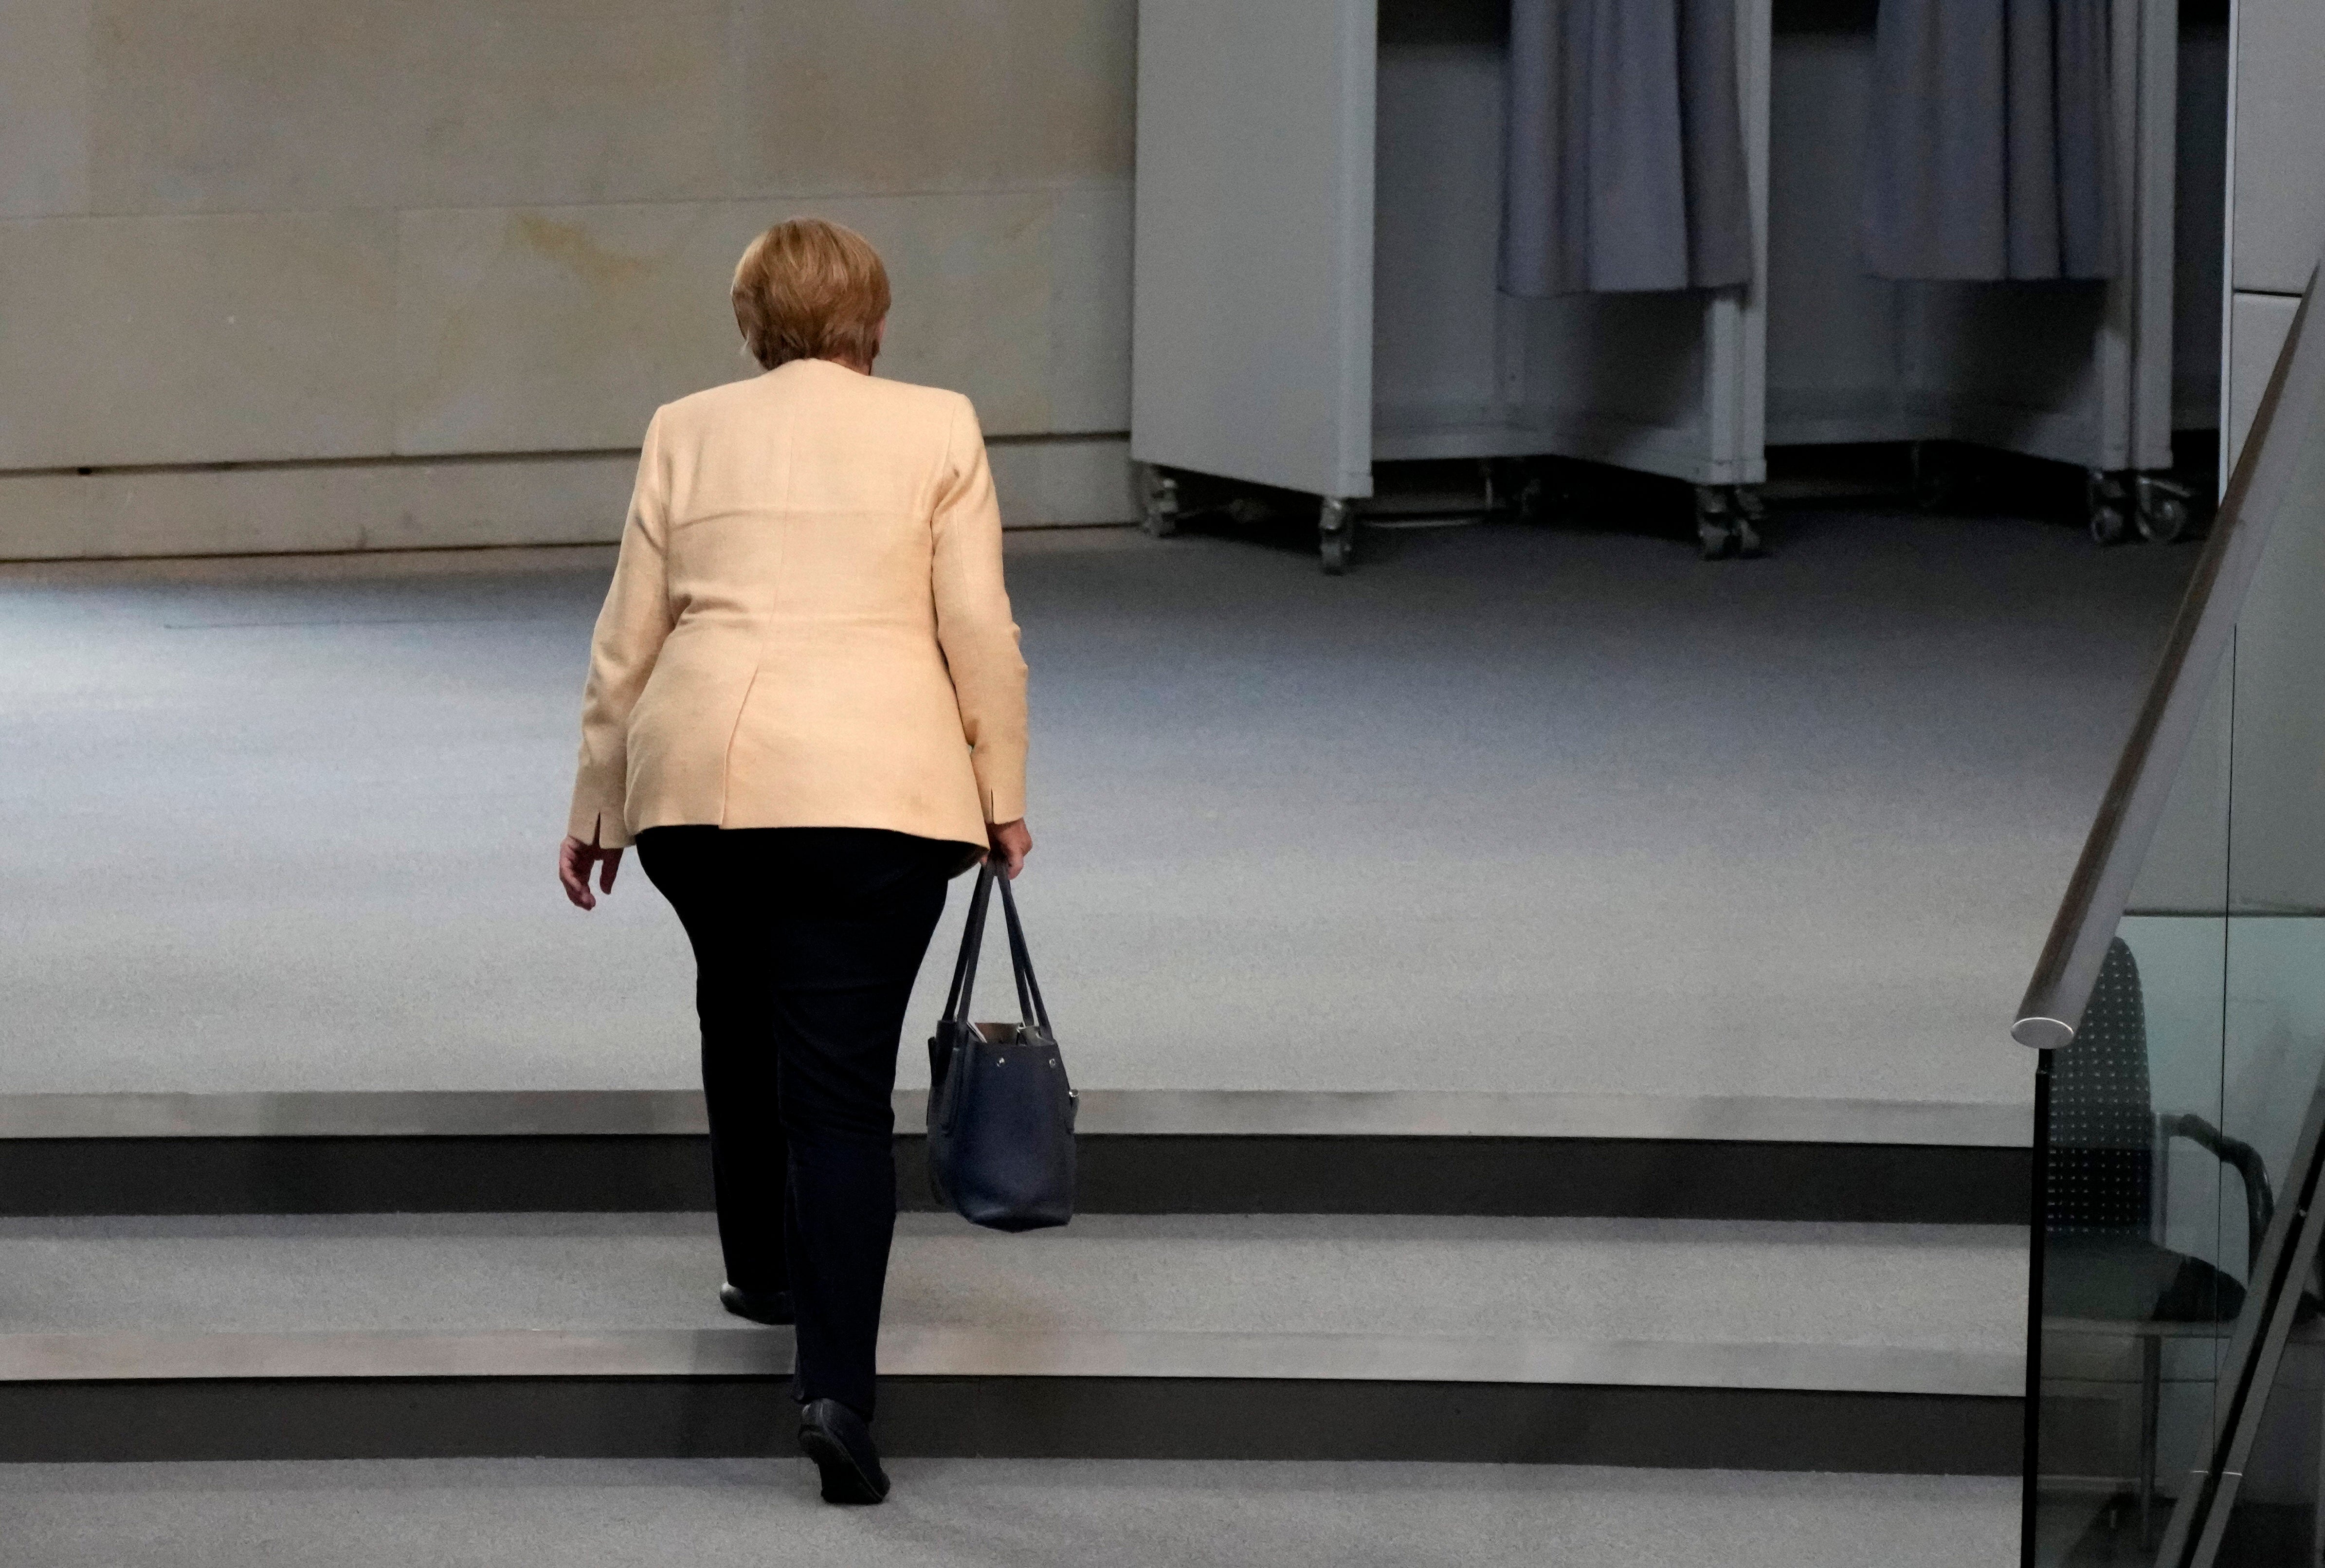 Germany’s outgoing chancellor, Angela Merkel